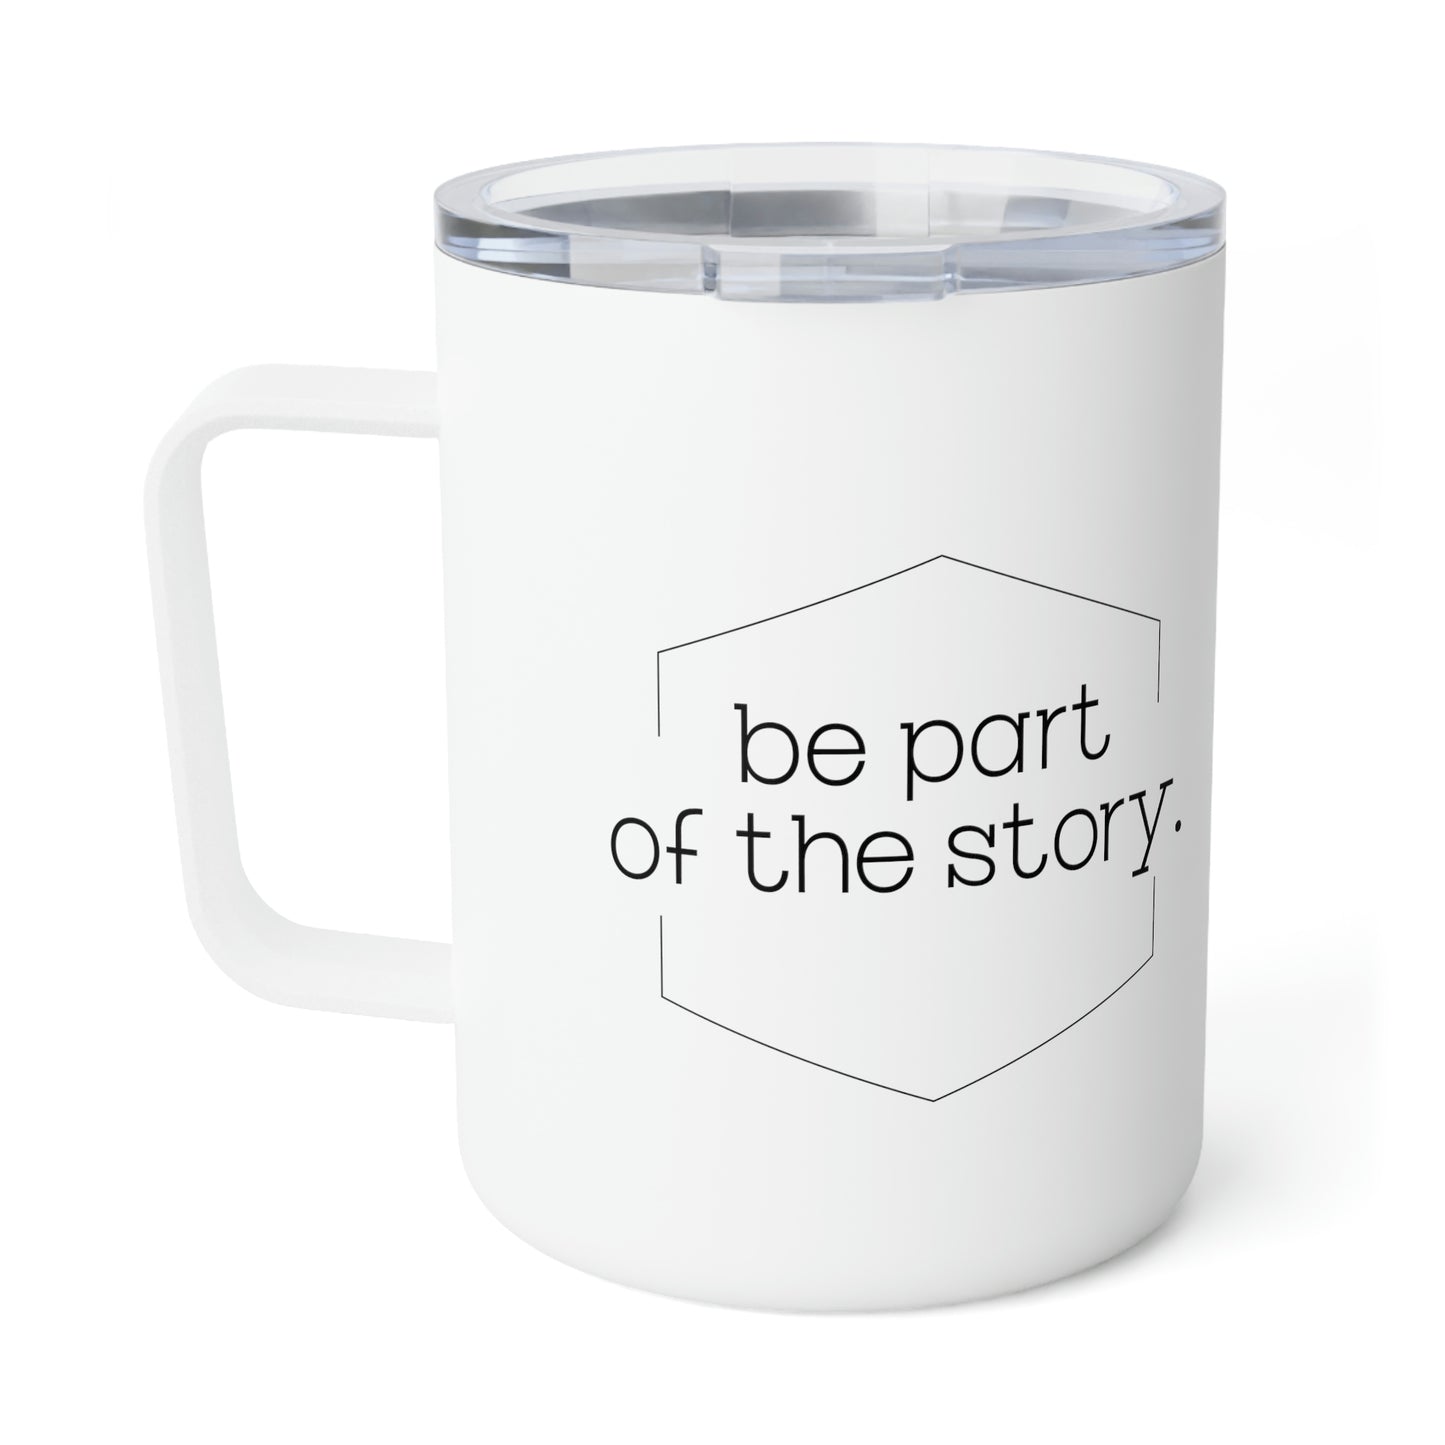 Be Part of the Story English Insulated Coffee Mug, 10oz